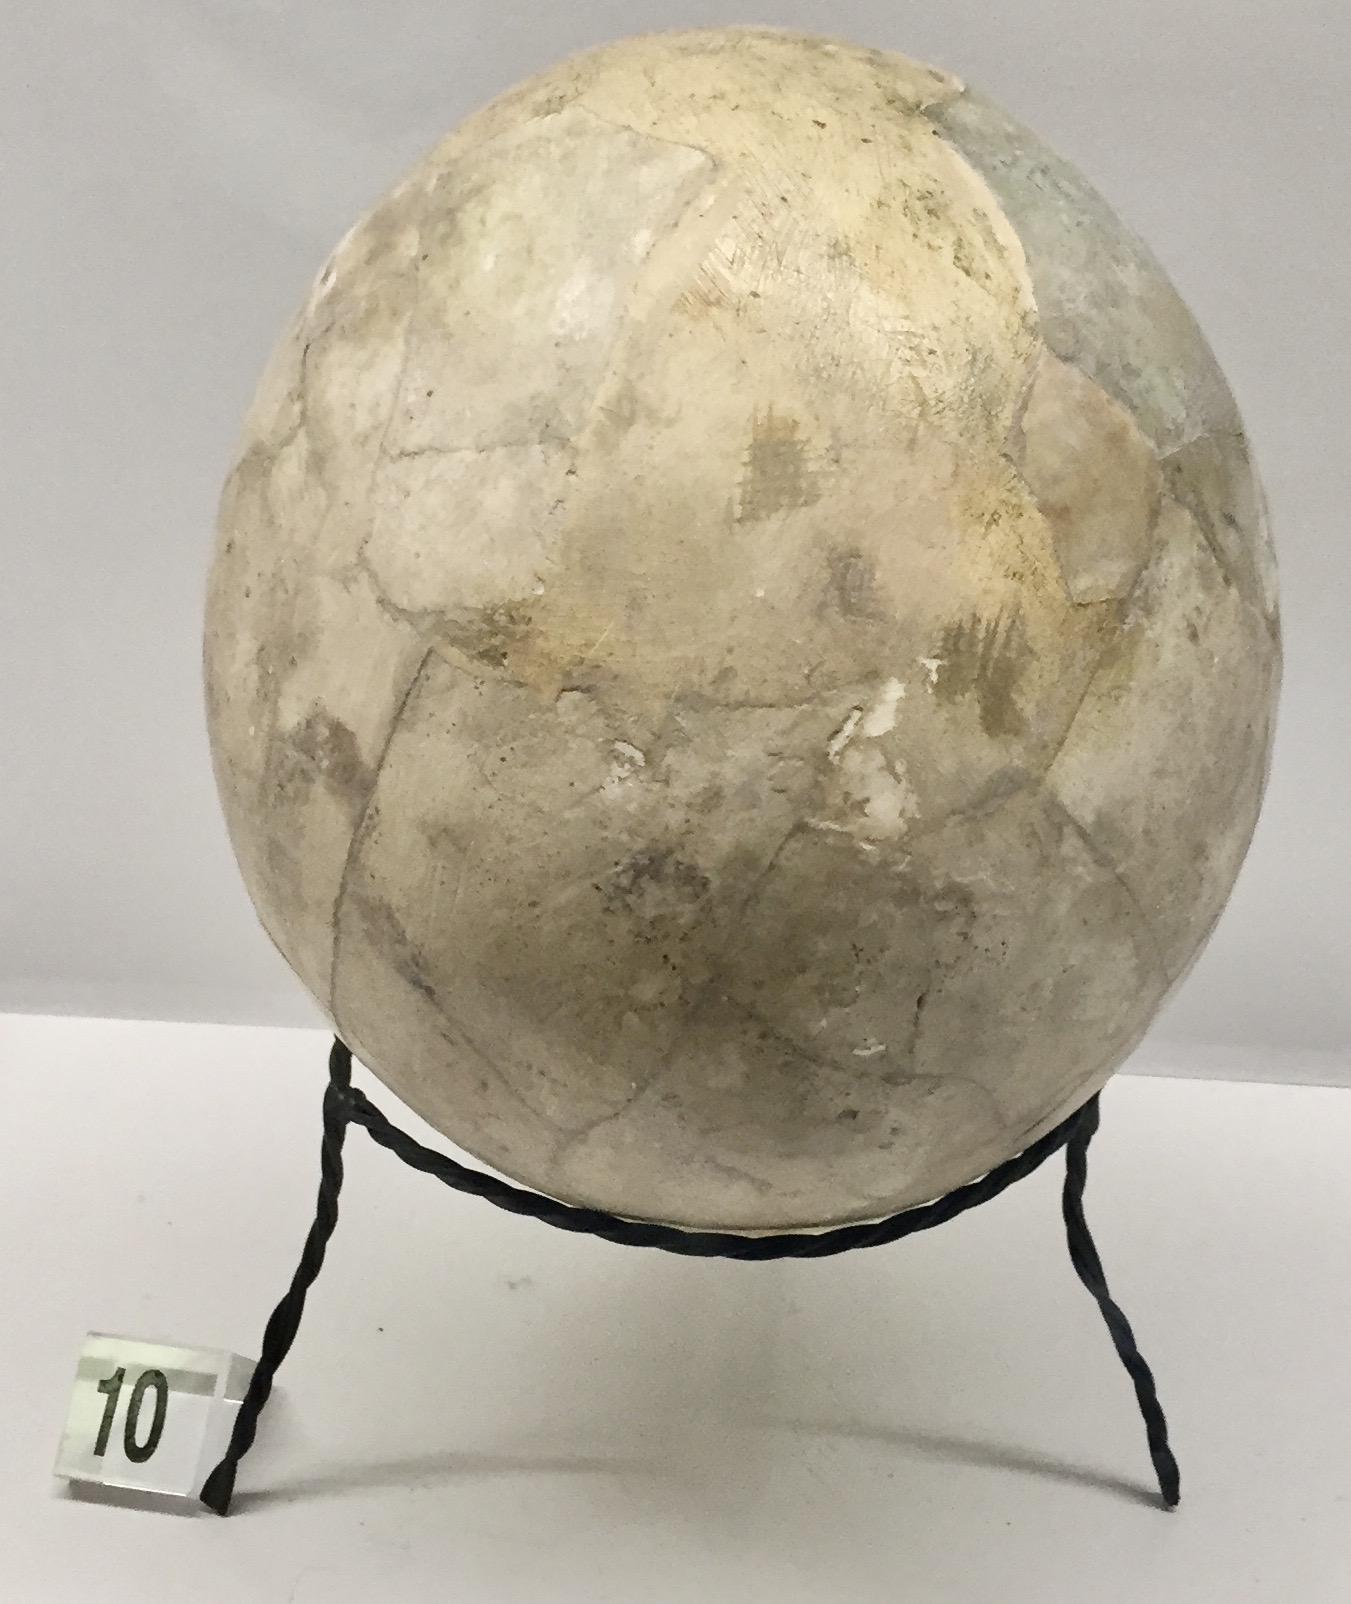 This ostrich egg was fashioned into a container and deposited as a grave good at the Etruscan necropolis in Cerveteri, Italy, circa 690-650 BCE. It was imported from the Upper Valley of the Nile River by Phoenician traders. National Etruscan Museum of the Villa Giulia. Rome, Italy.